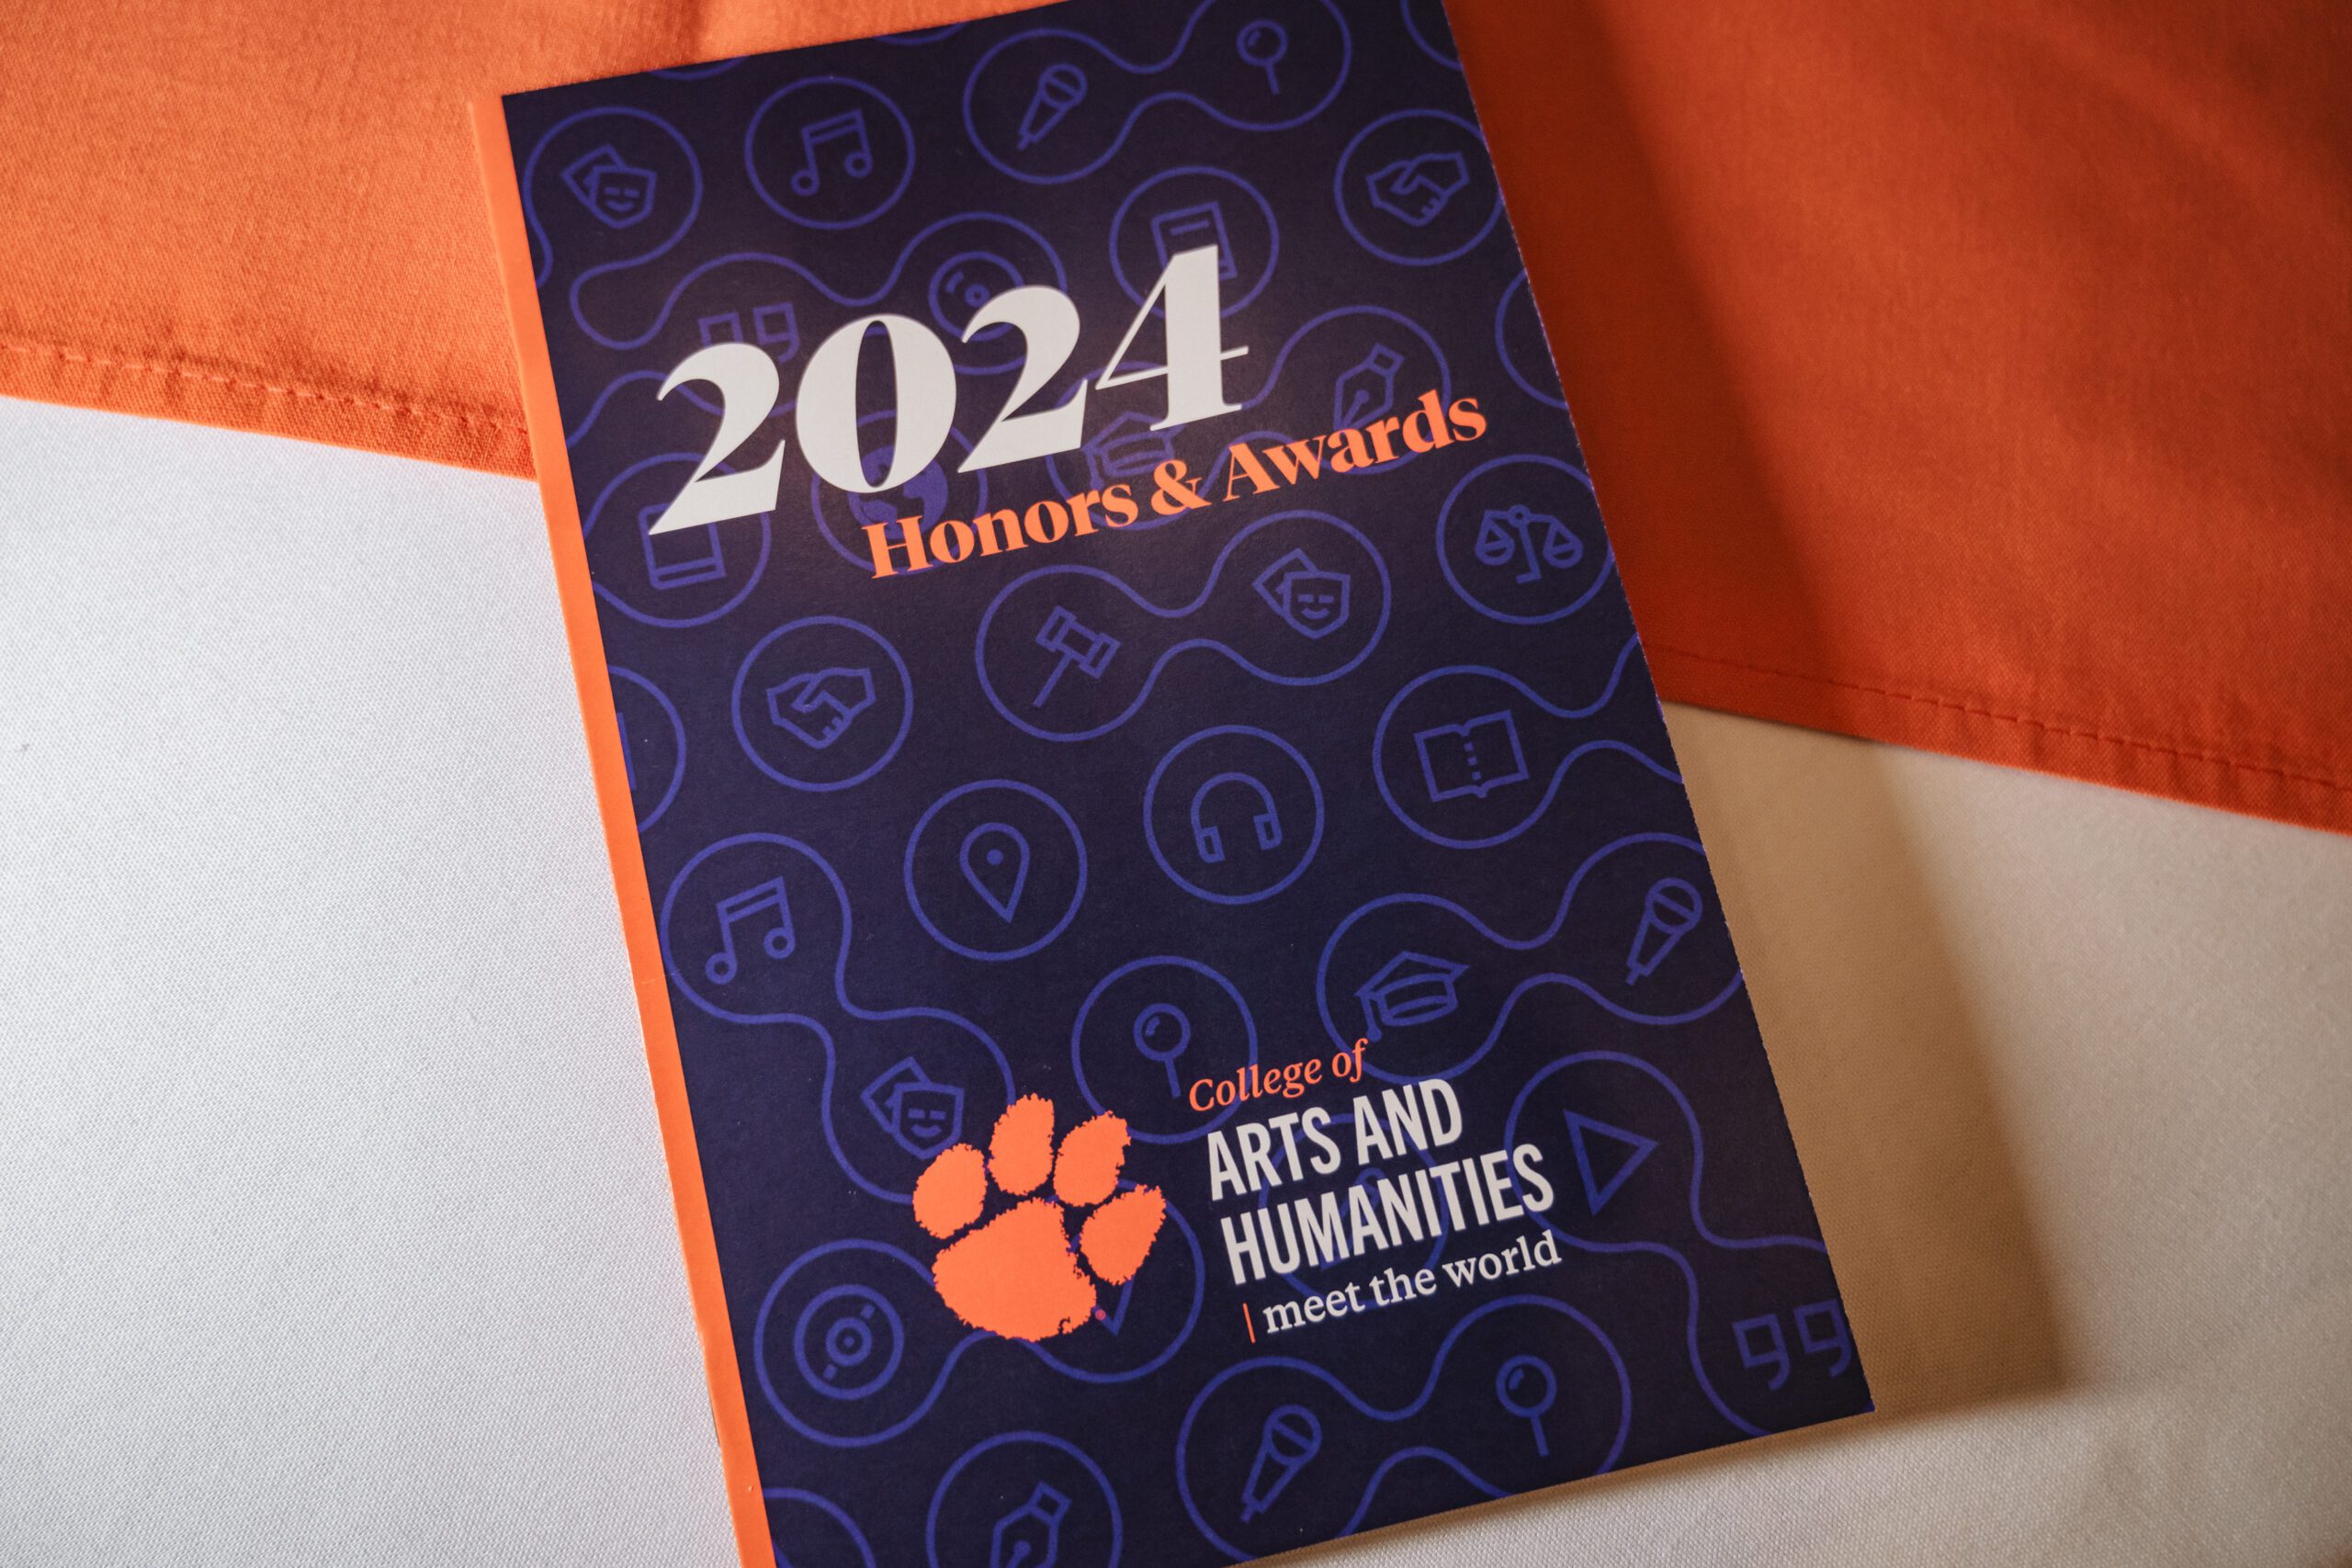 A pamphlet titled, "2024: Honors and Awards" for the College of Arts and Humanities.